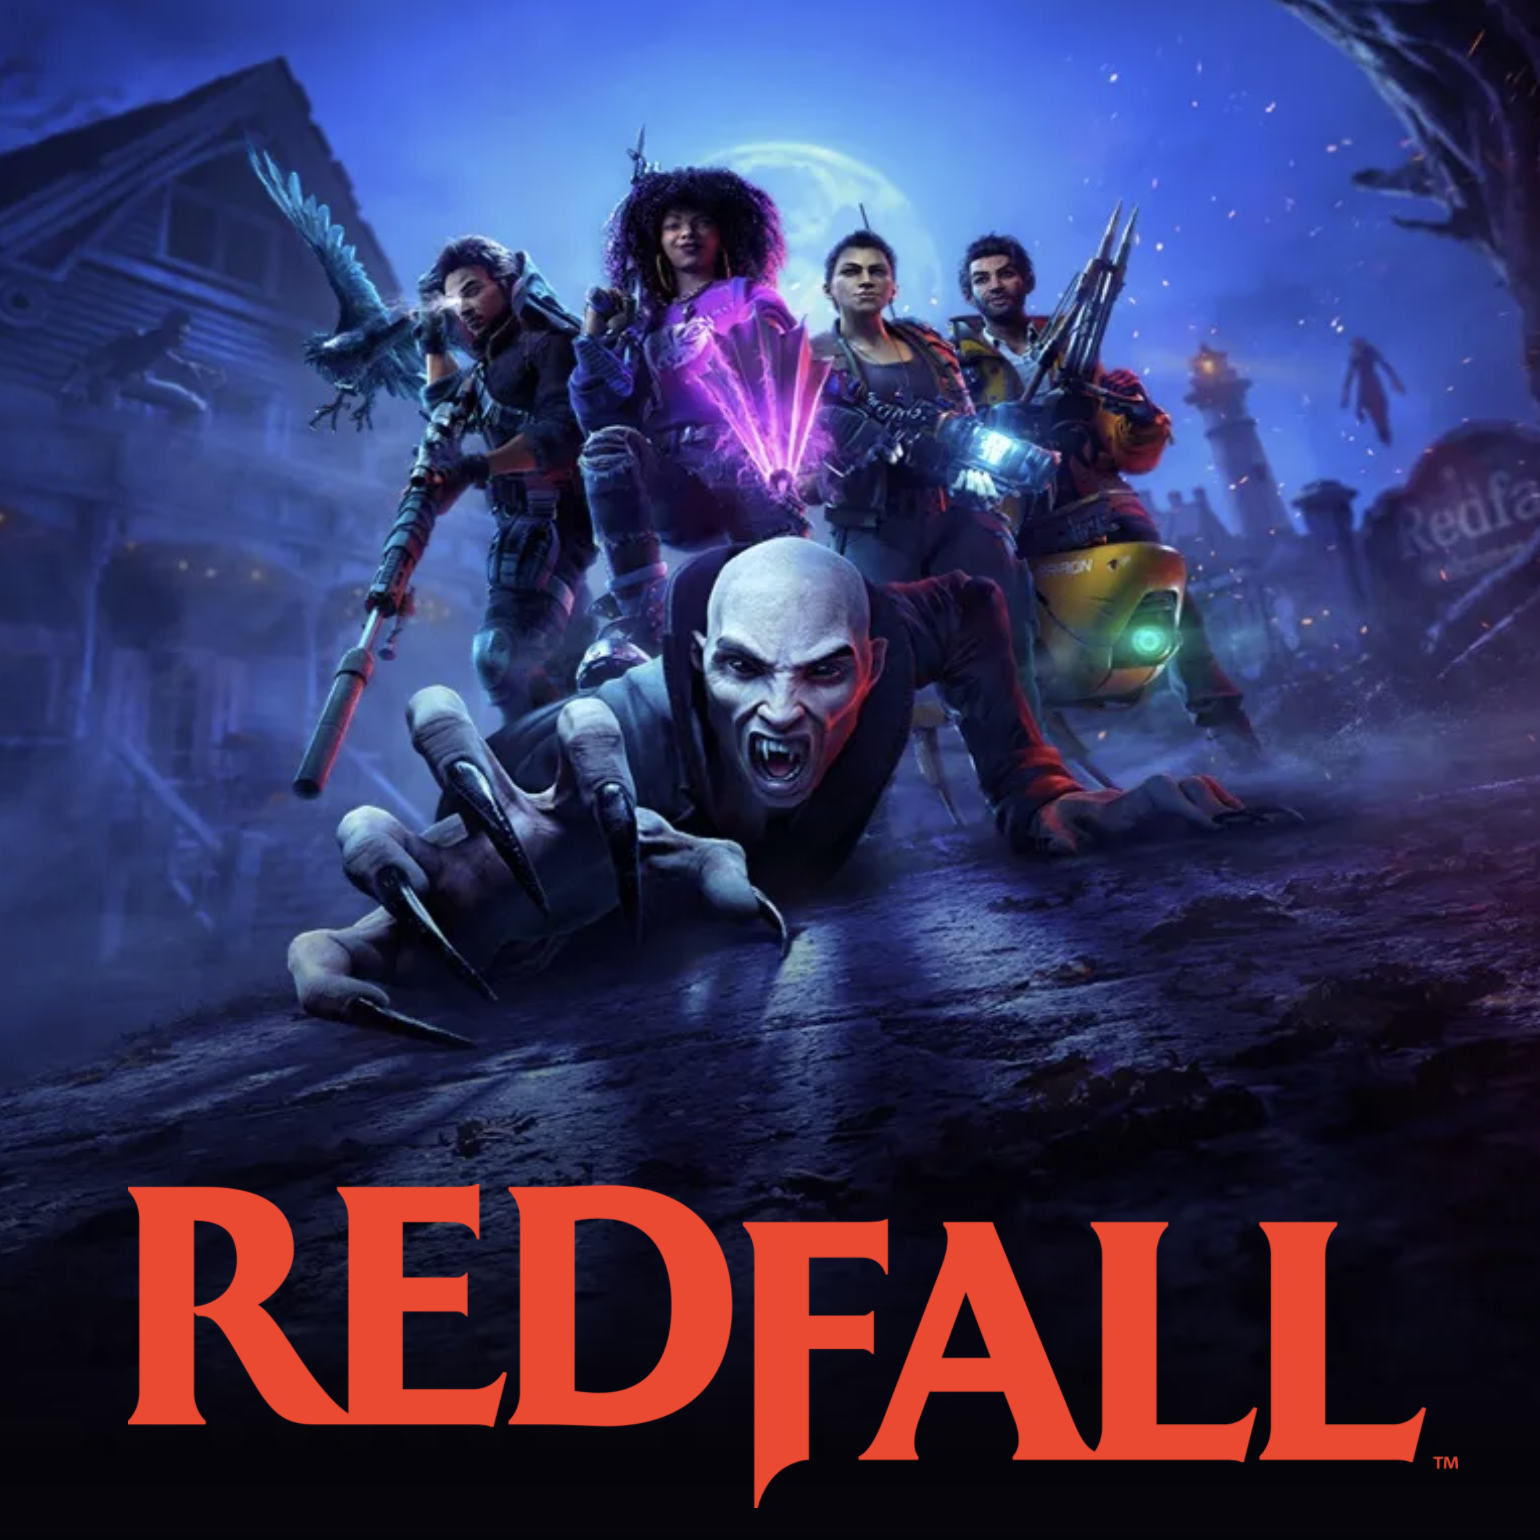 Redfall - A New Breed of Vampire Game: Previewing the Latest Release from Bethesda